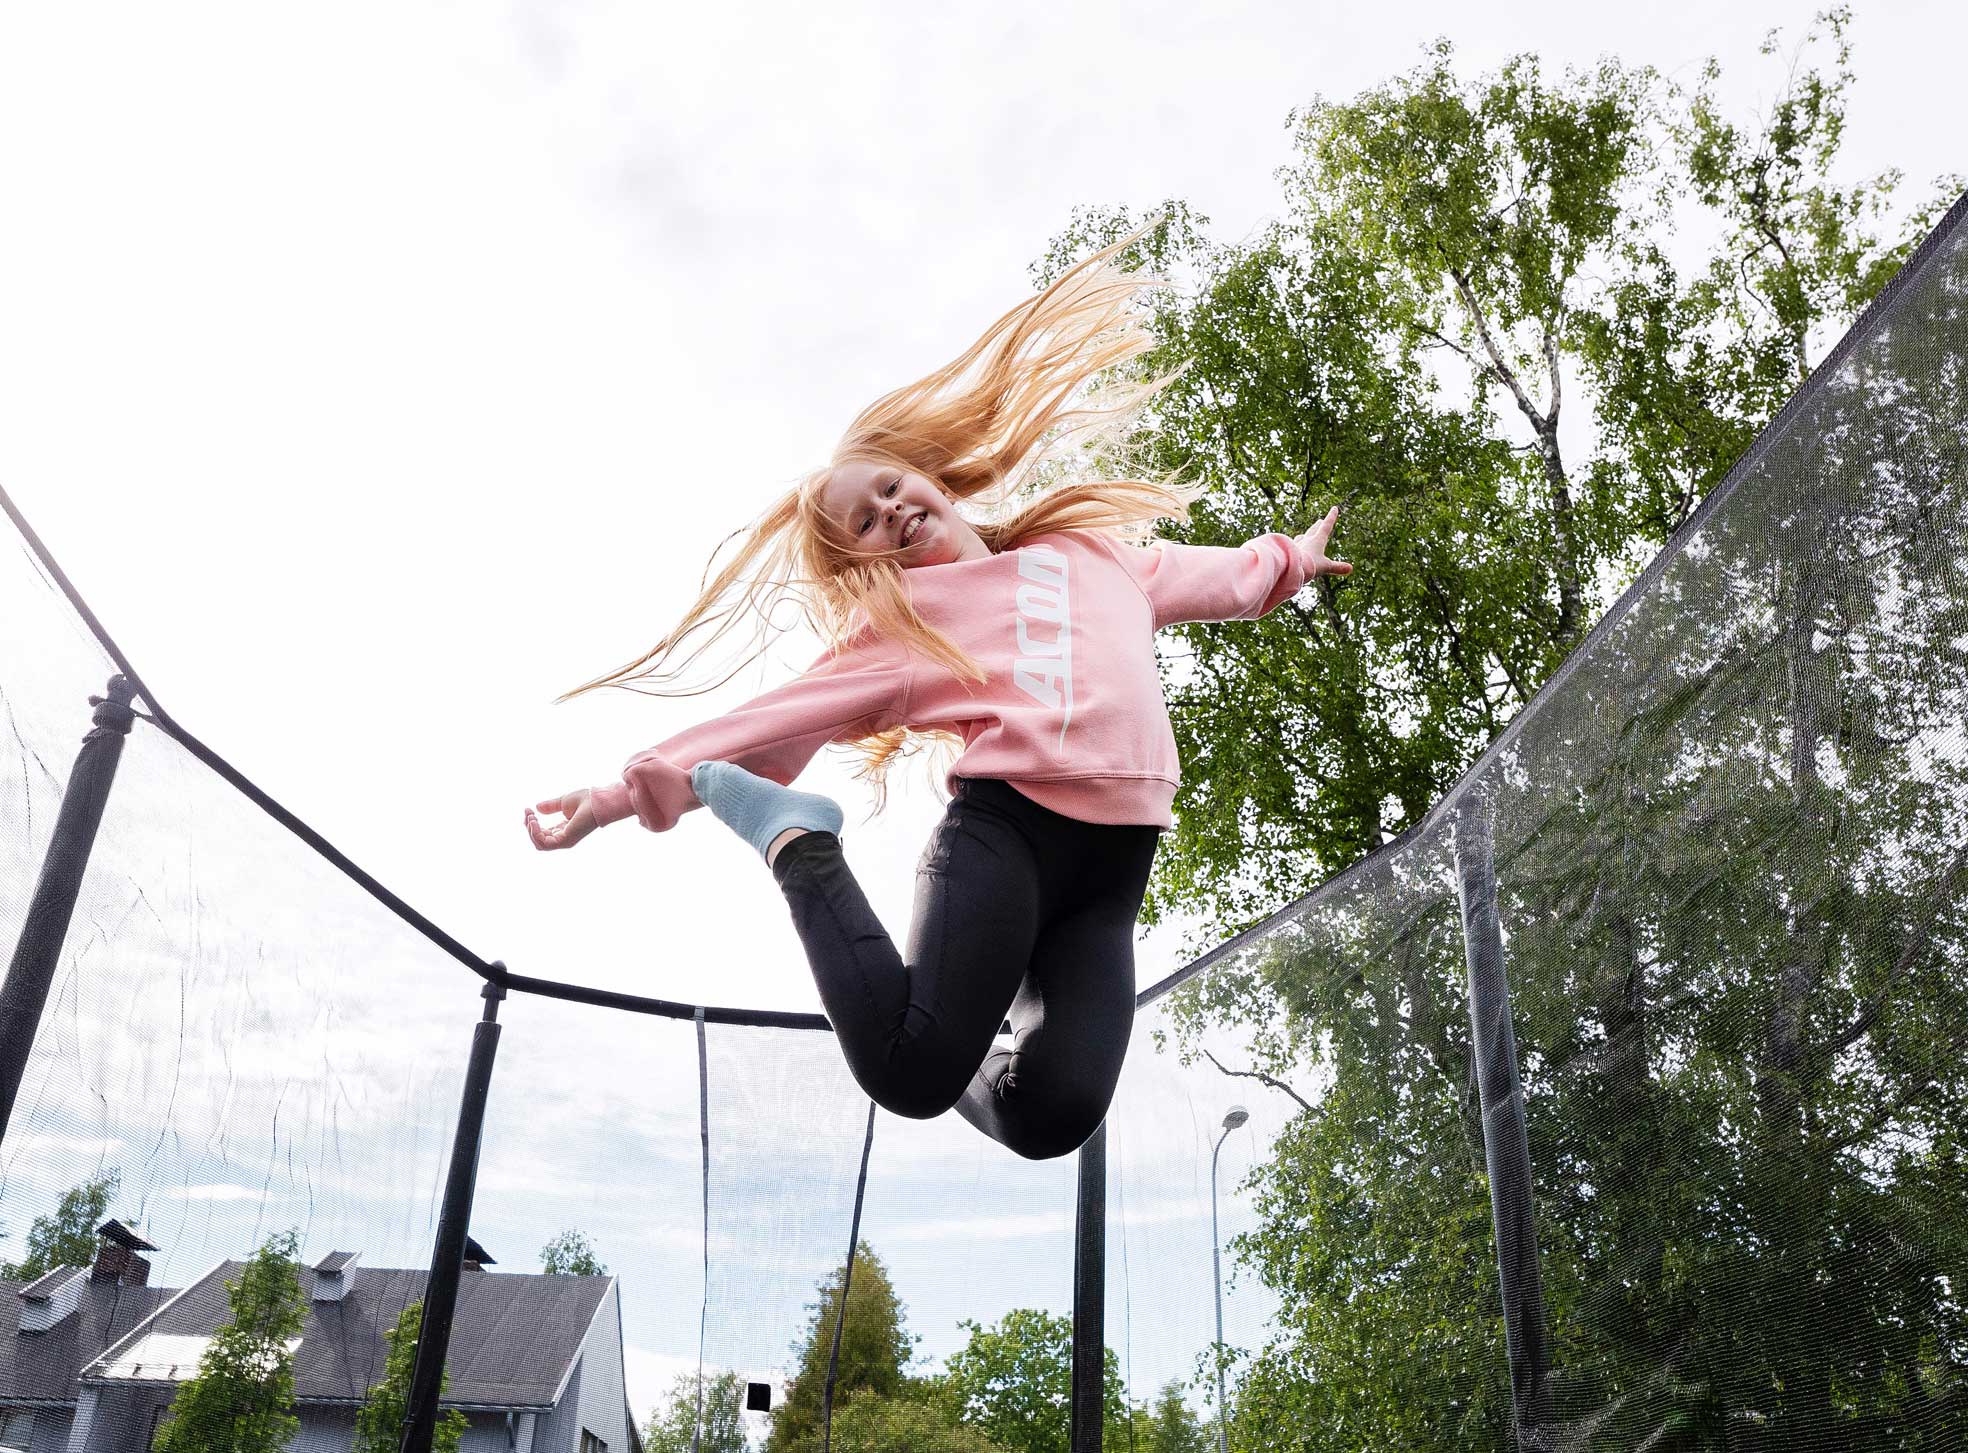 A girl wearing pink Acon college shirt jumps on trampoline